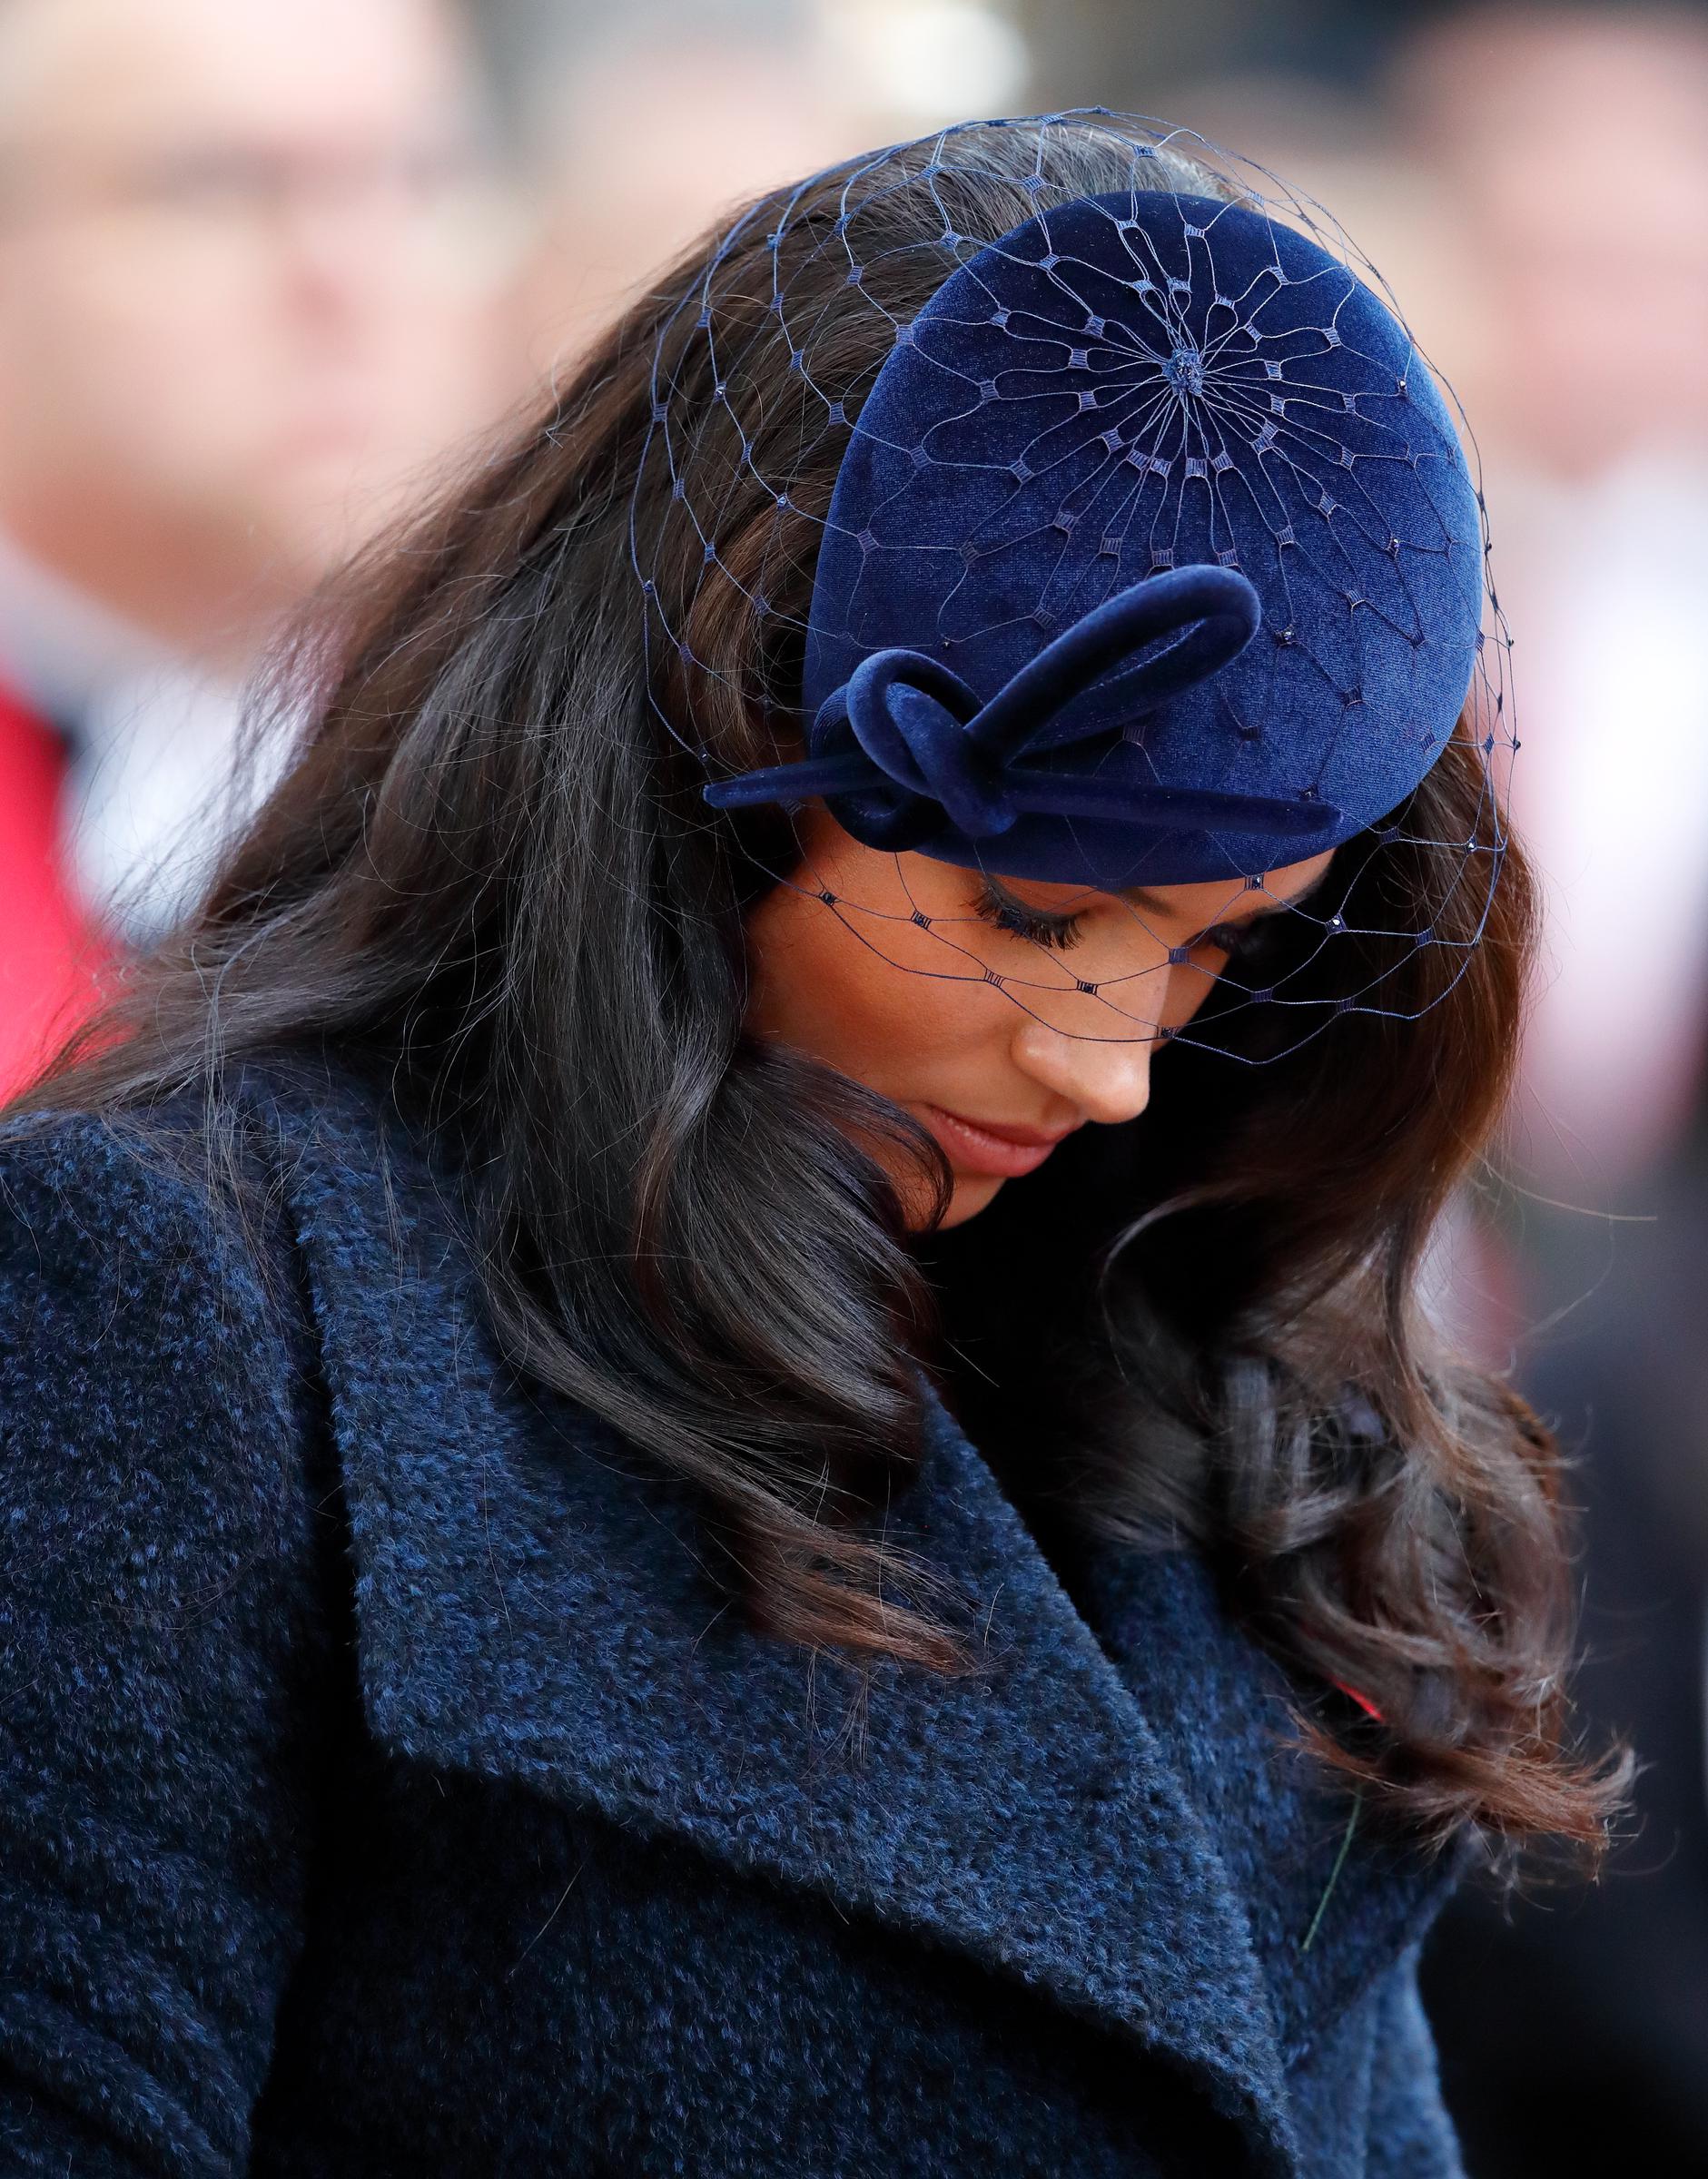 Meghan Markle bows her head as she attends the 91st Field of Remembrance at Westminster Abbey on November 7, 2019, in London, England. | Source: Getty Images